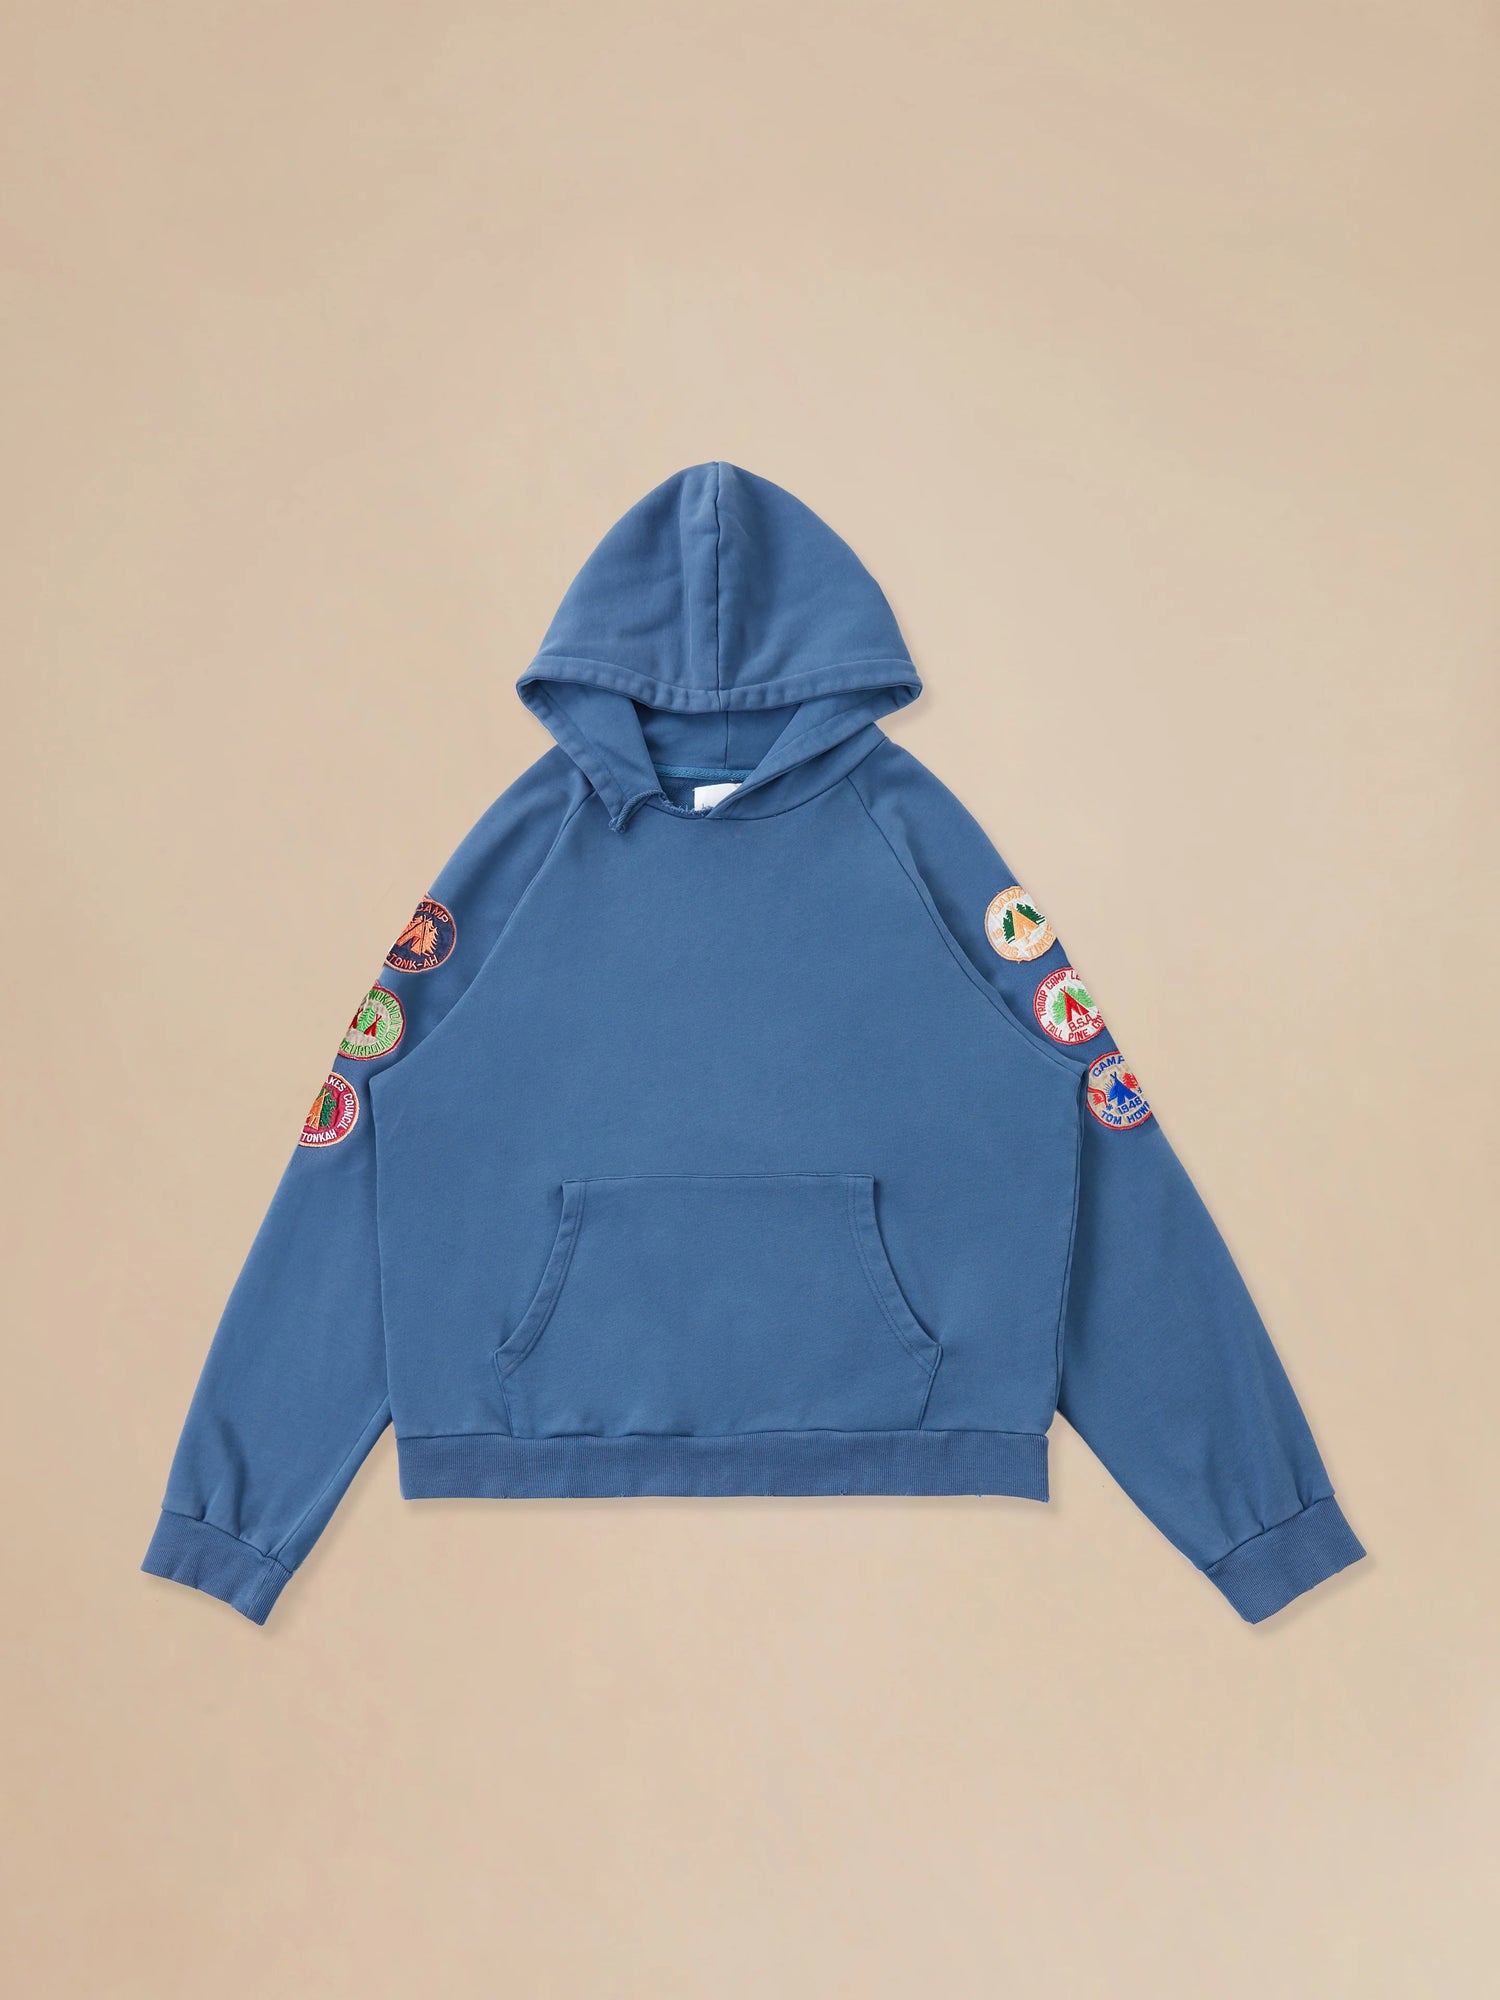 A vintage-inspired Found Timber Campground Hoodie with colorful patches and distressed details.